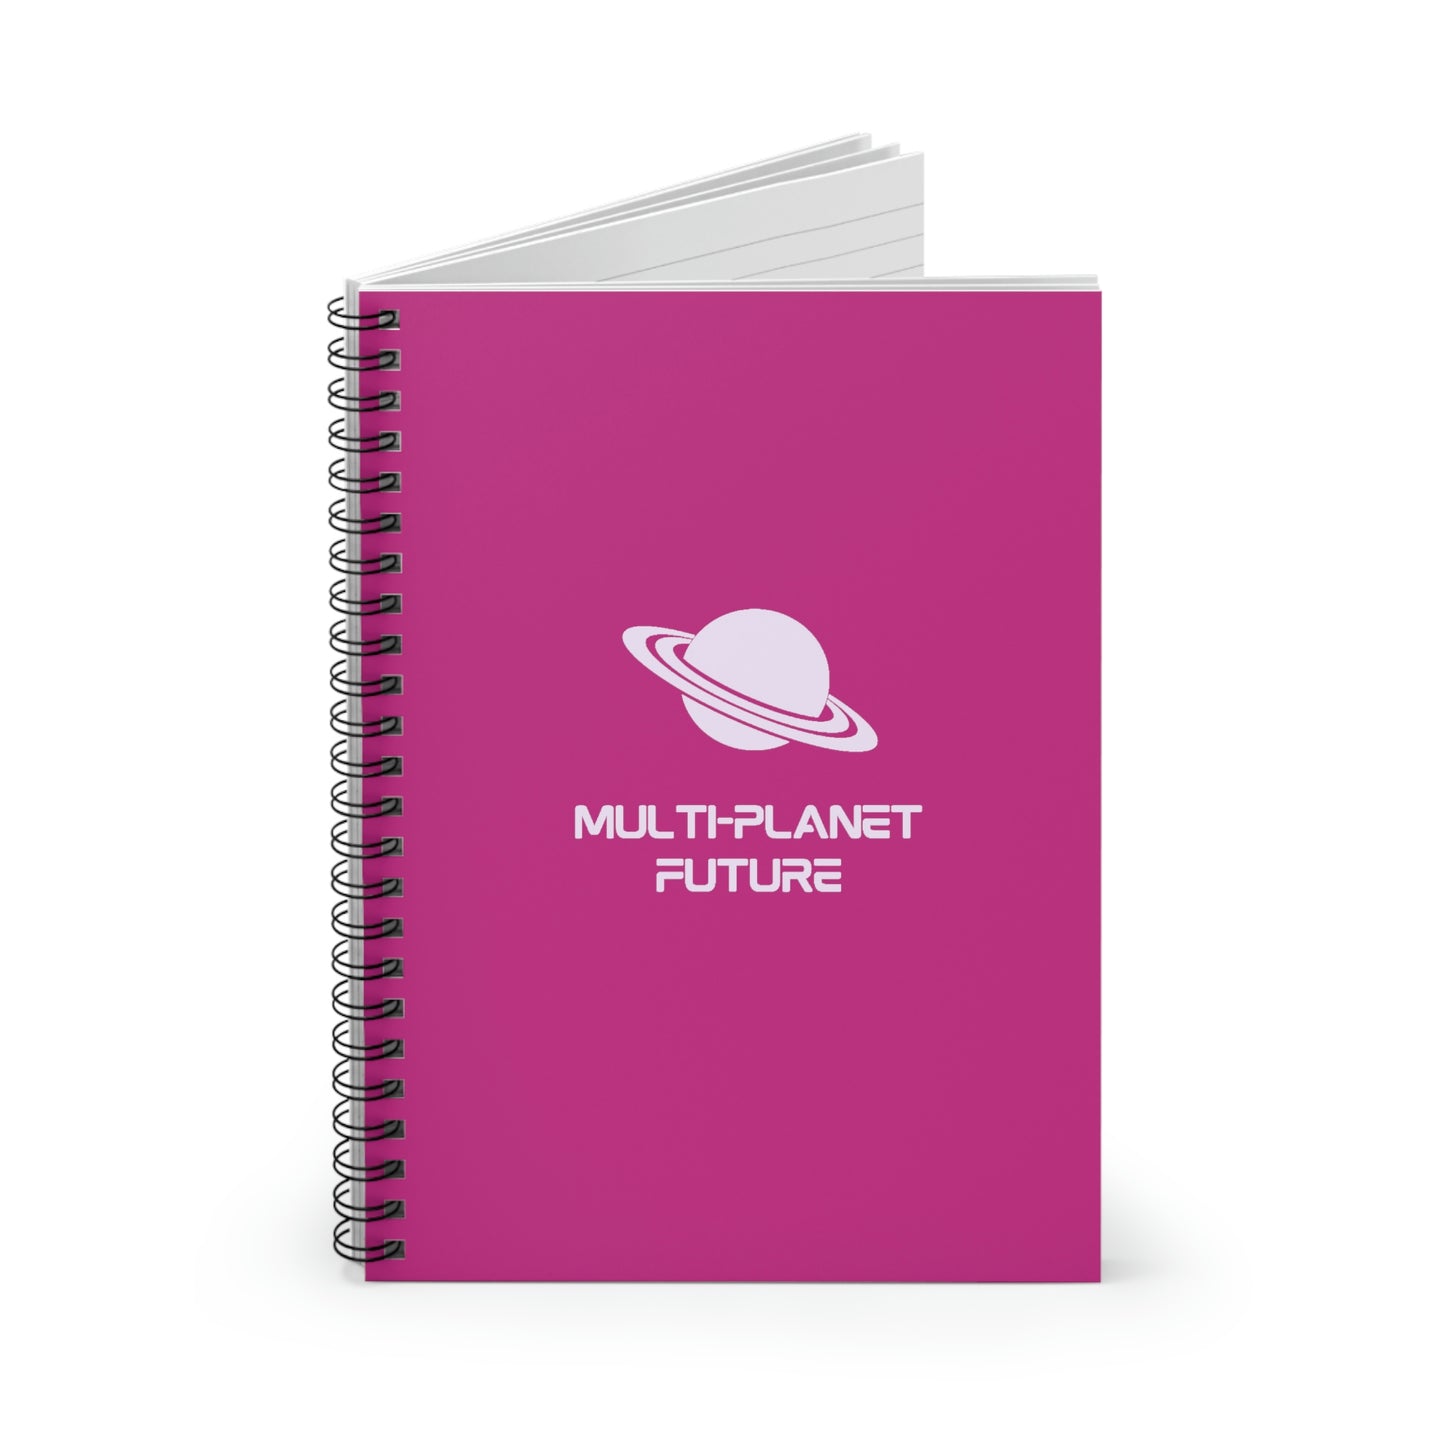 MULTI-PLANET FUTURE - Spiral Notebook - Ruled Line